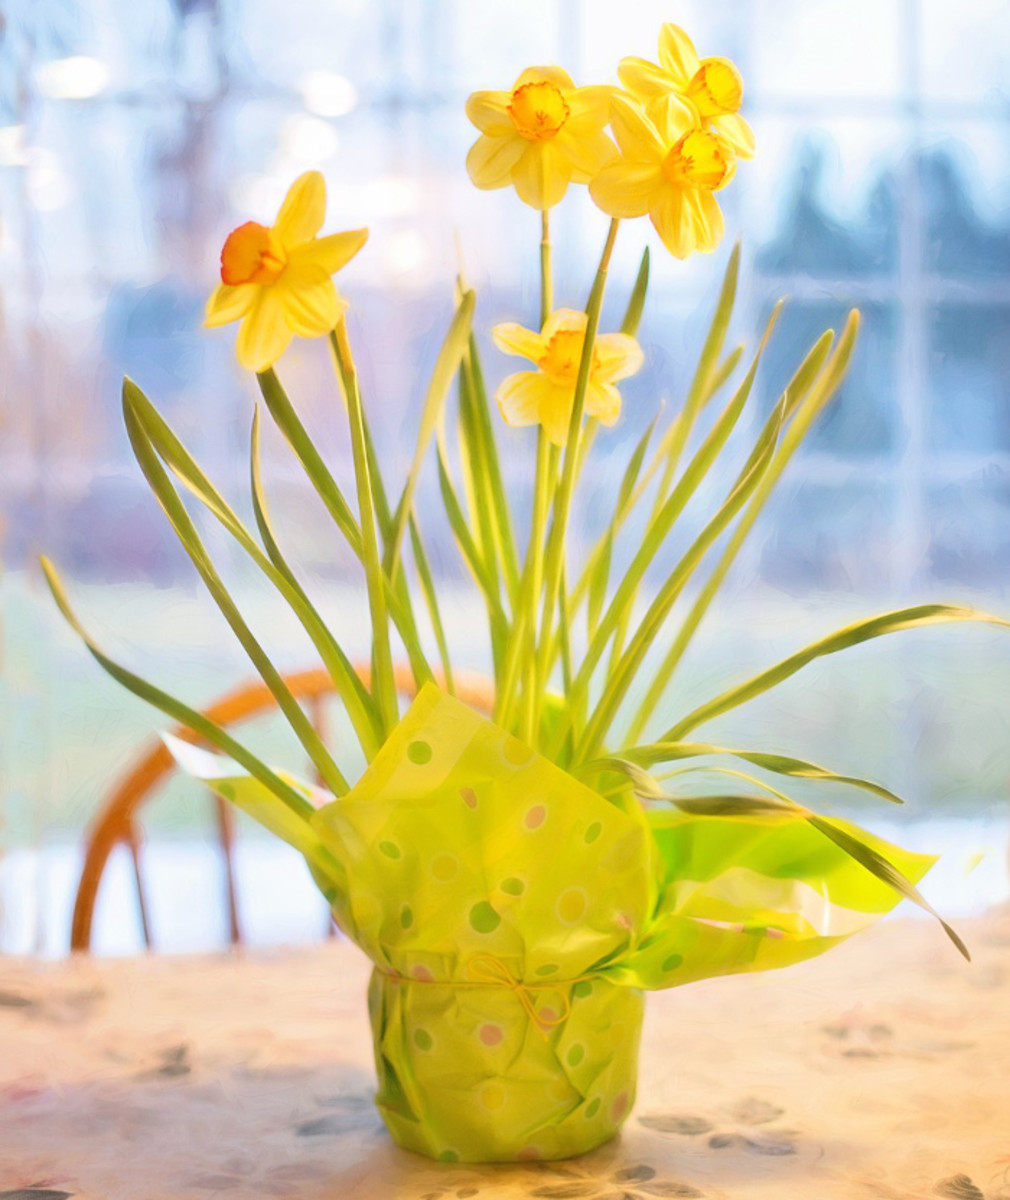 Daffodils are wonderful and bright flowers that are associated with the spring season.